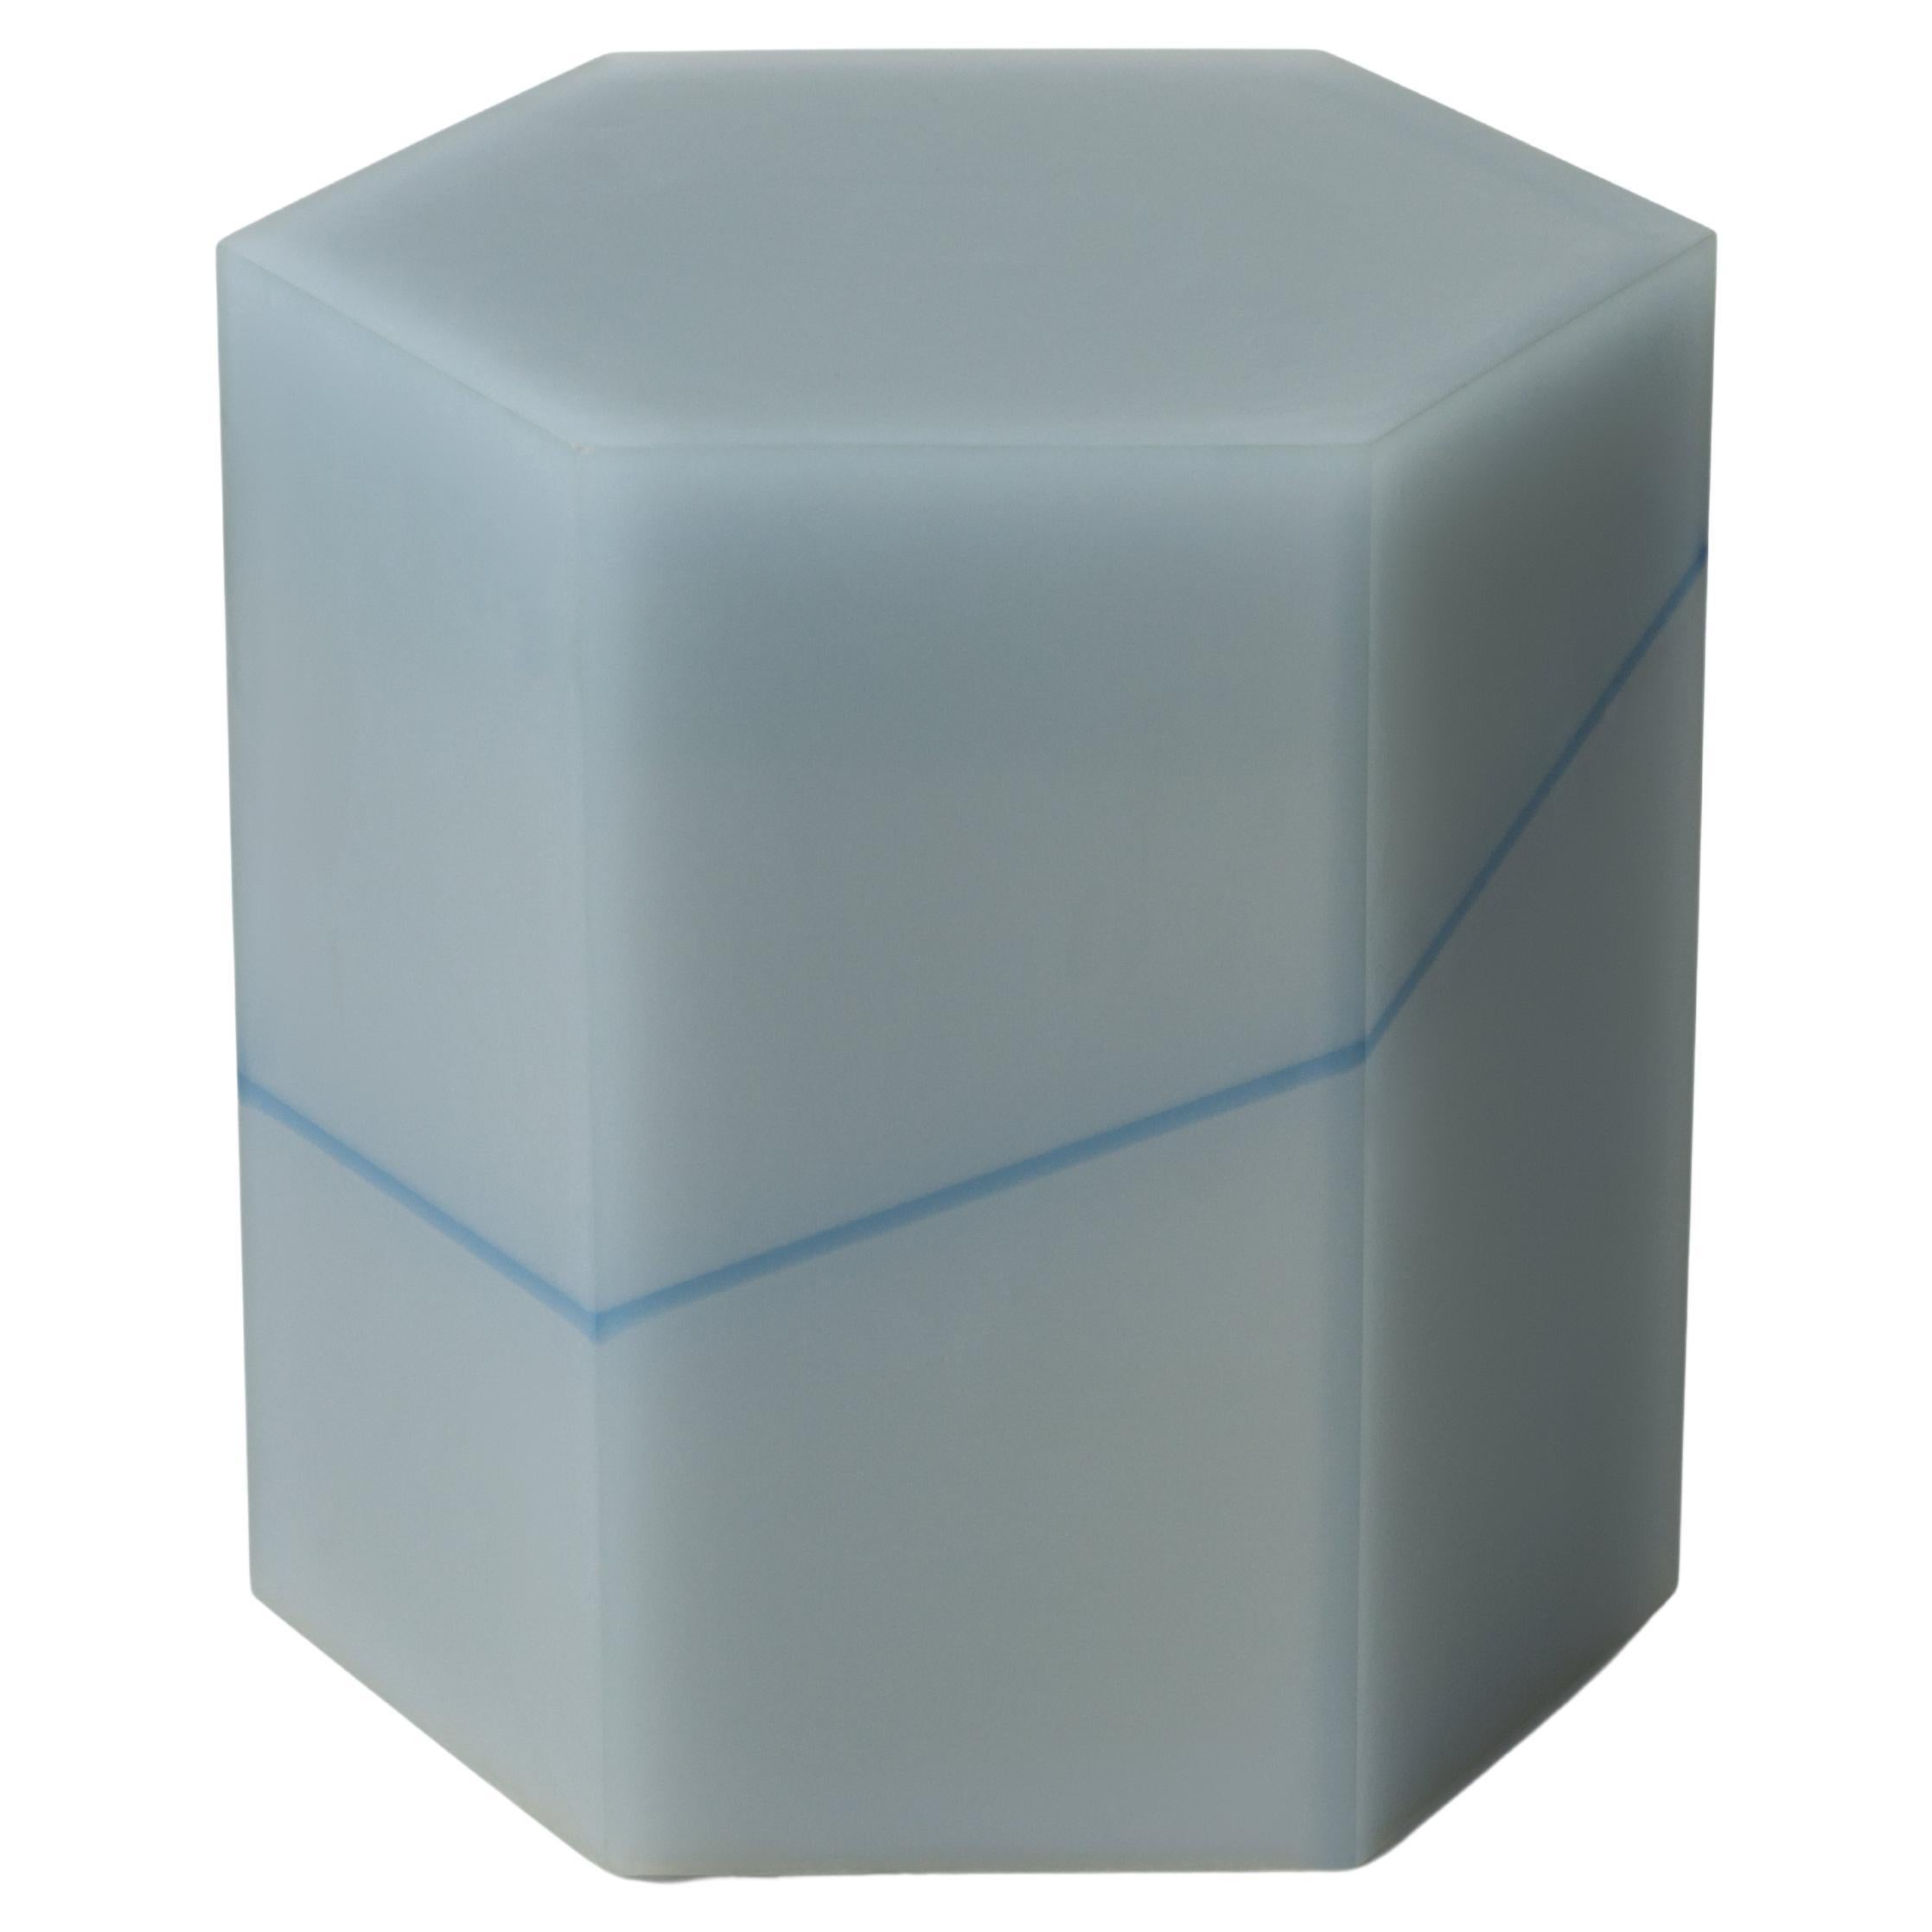 Blue Line Hex Box Resin Side Table by Facture Studio, REP by Tuleste Factory